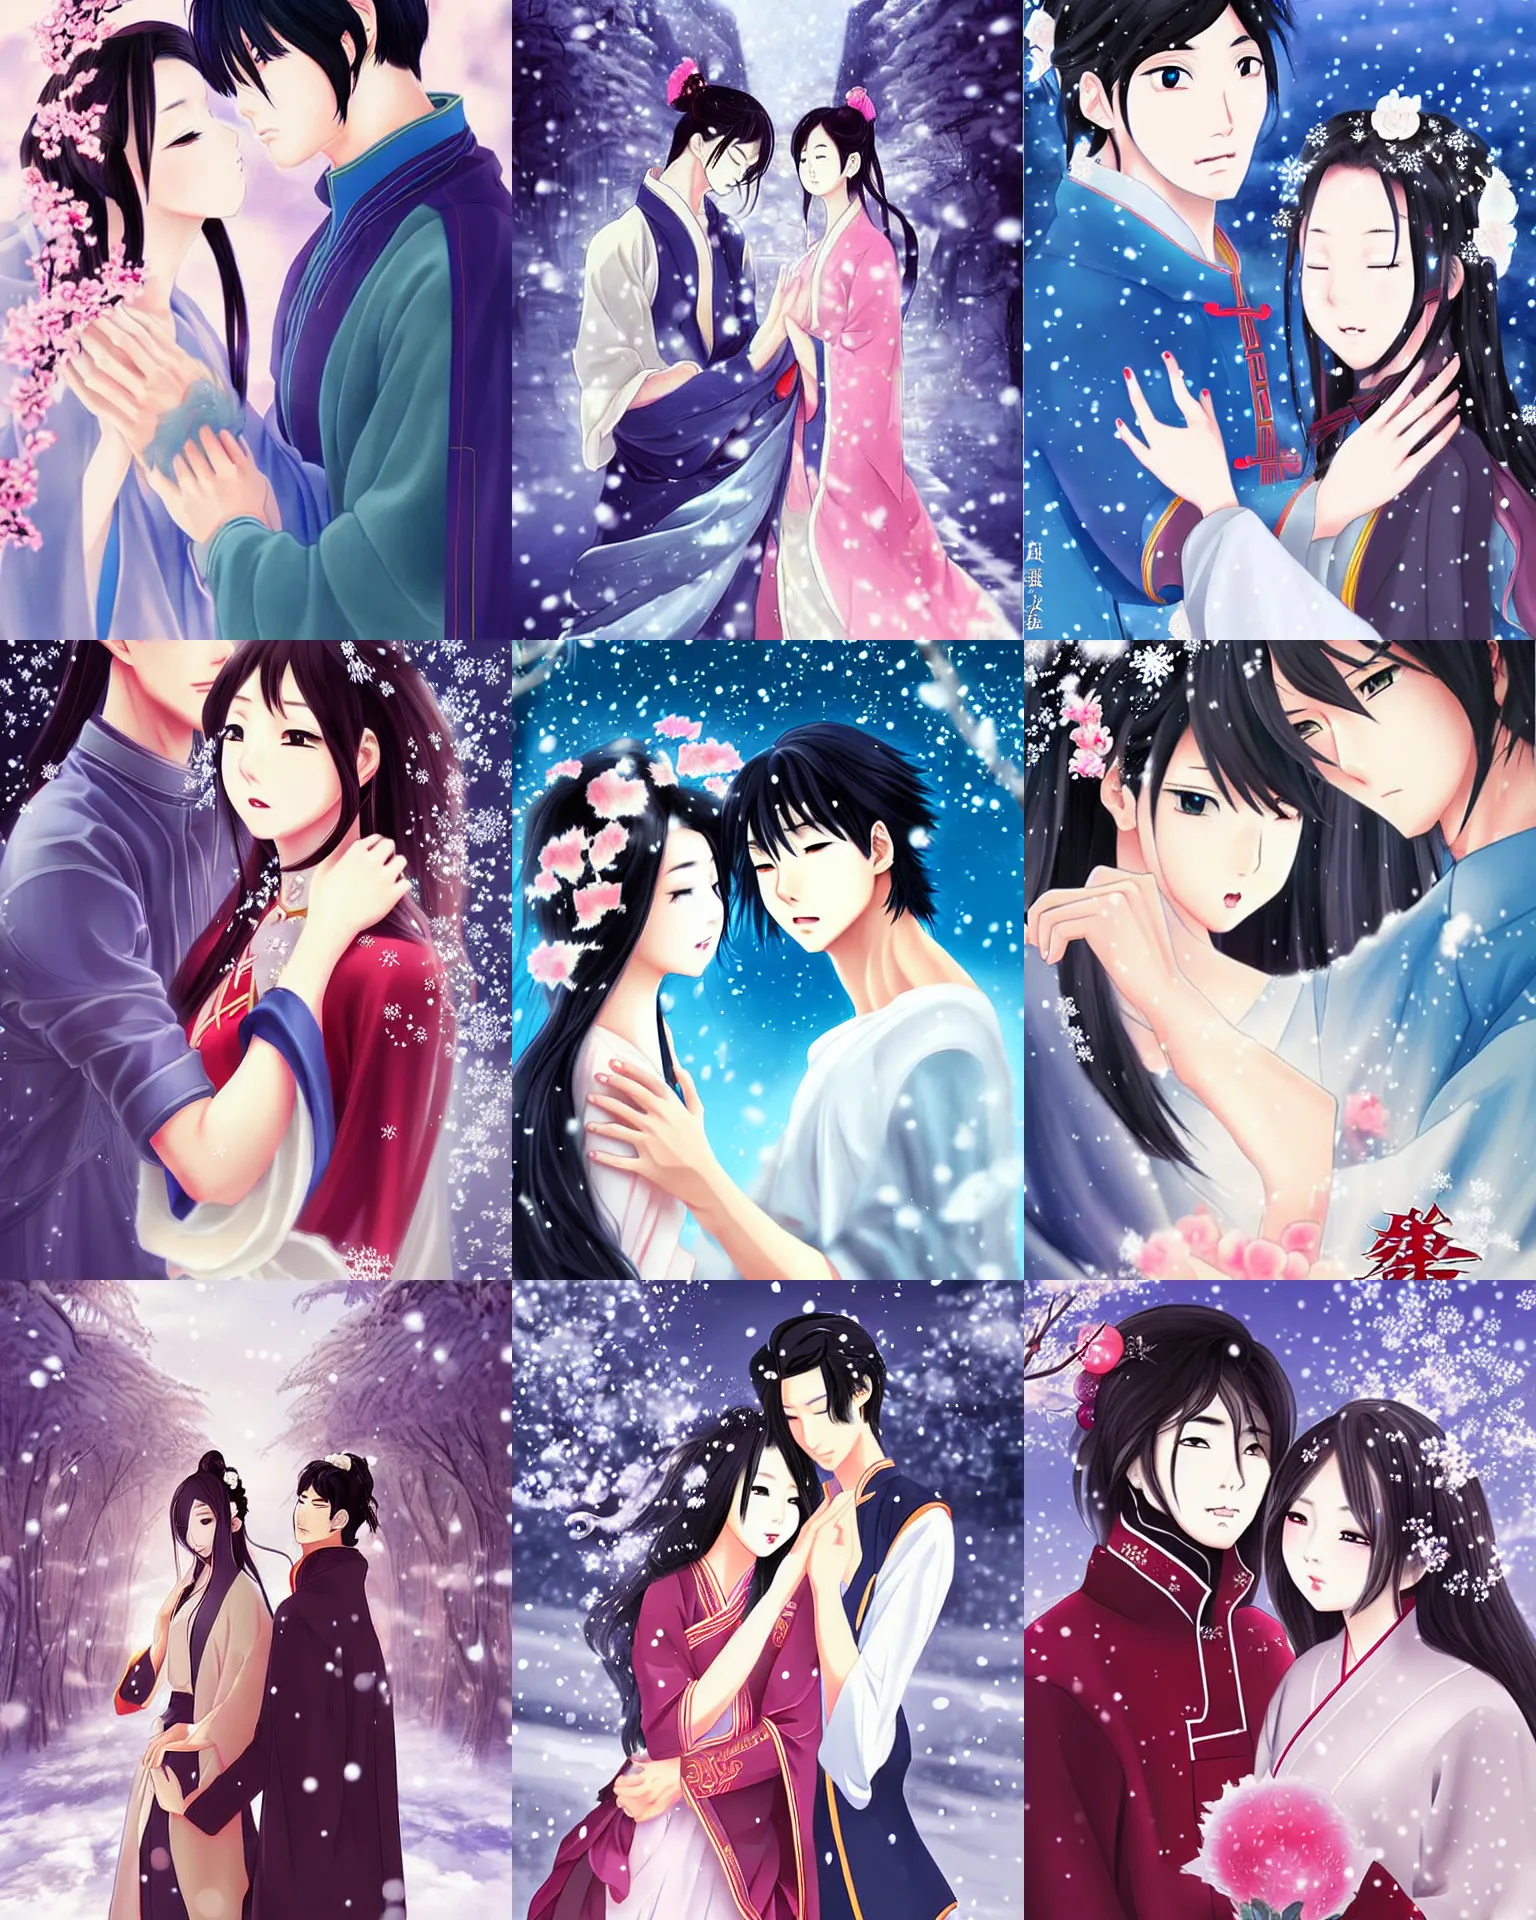 Prompt: couple art love first snow chinese asian anime couples fantasy illustrations artwork by lilen the woman is so gorgeous, the man is so majestic. the art style reminds me of what i dream about, the beautiful girl in the game, the power of love, her graceful and serene pose,